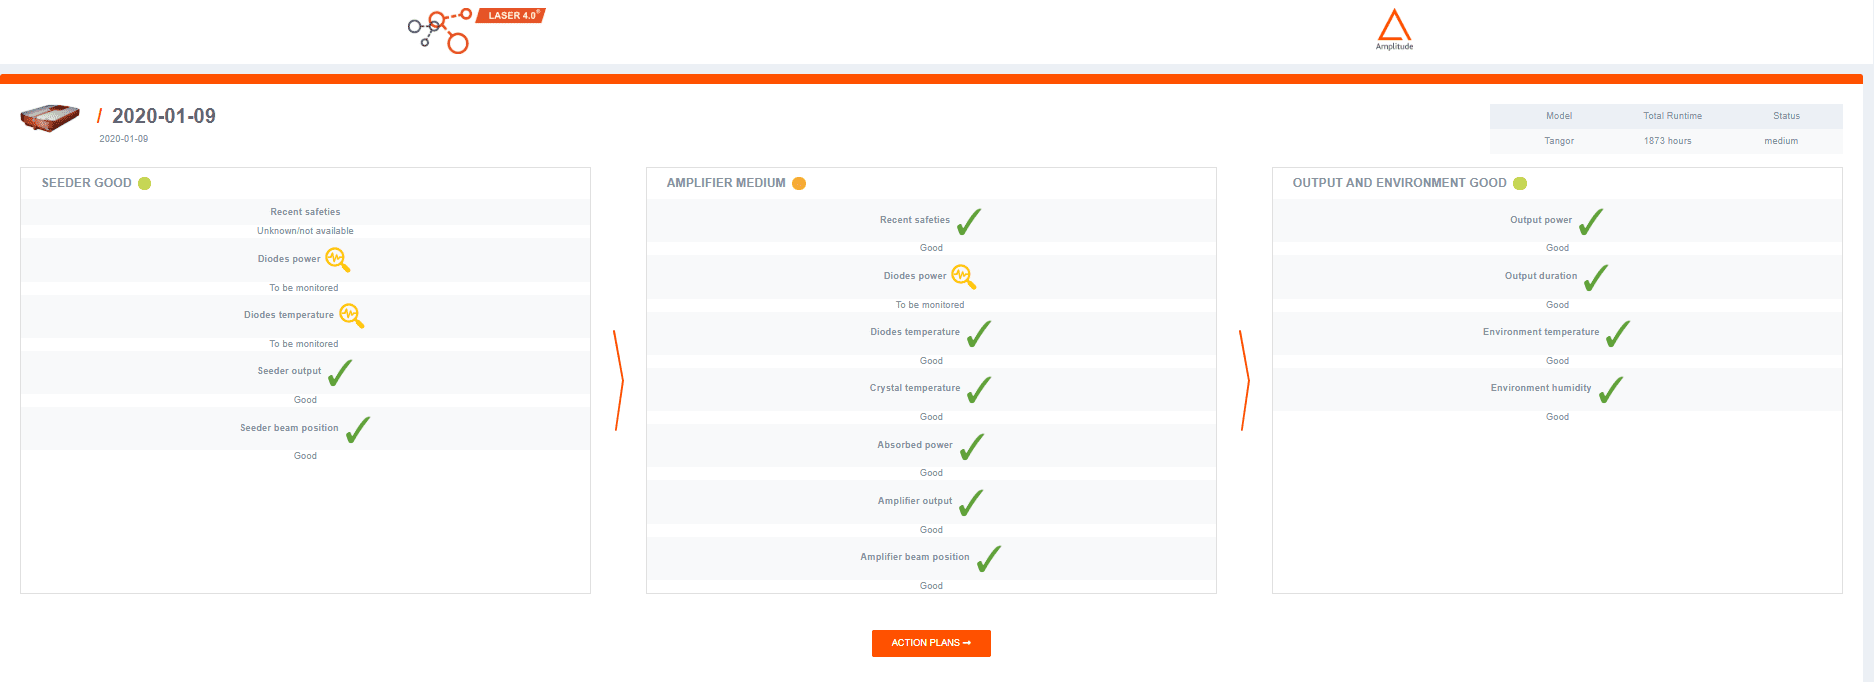 Screenshot of our 4.0 healthcheck system